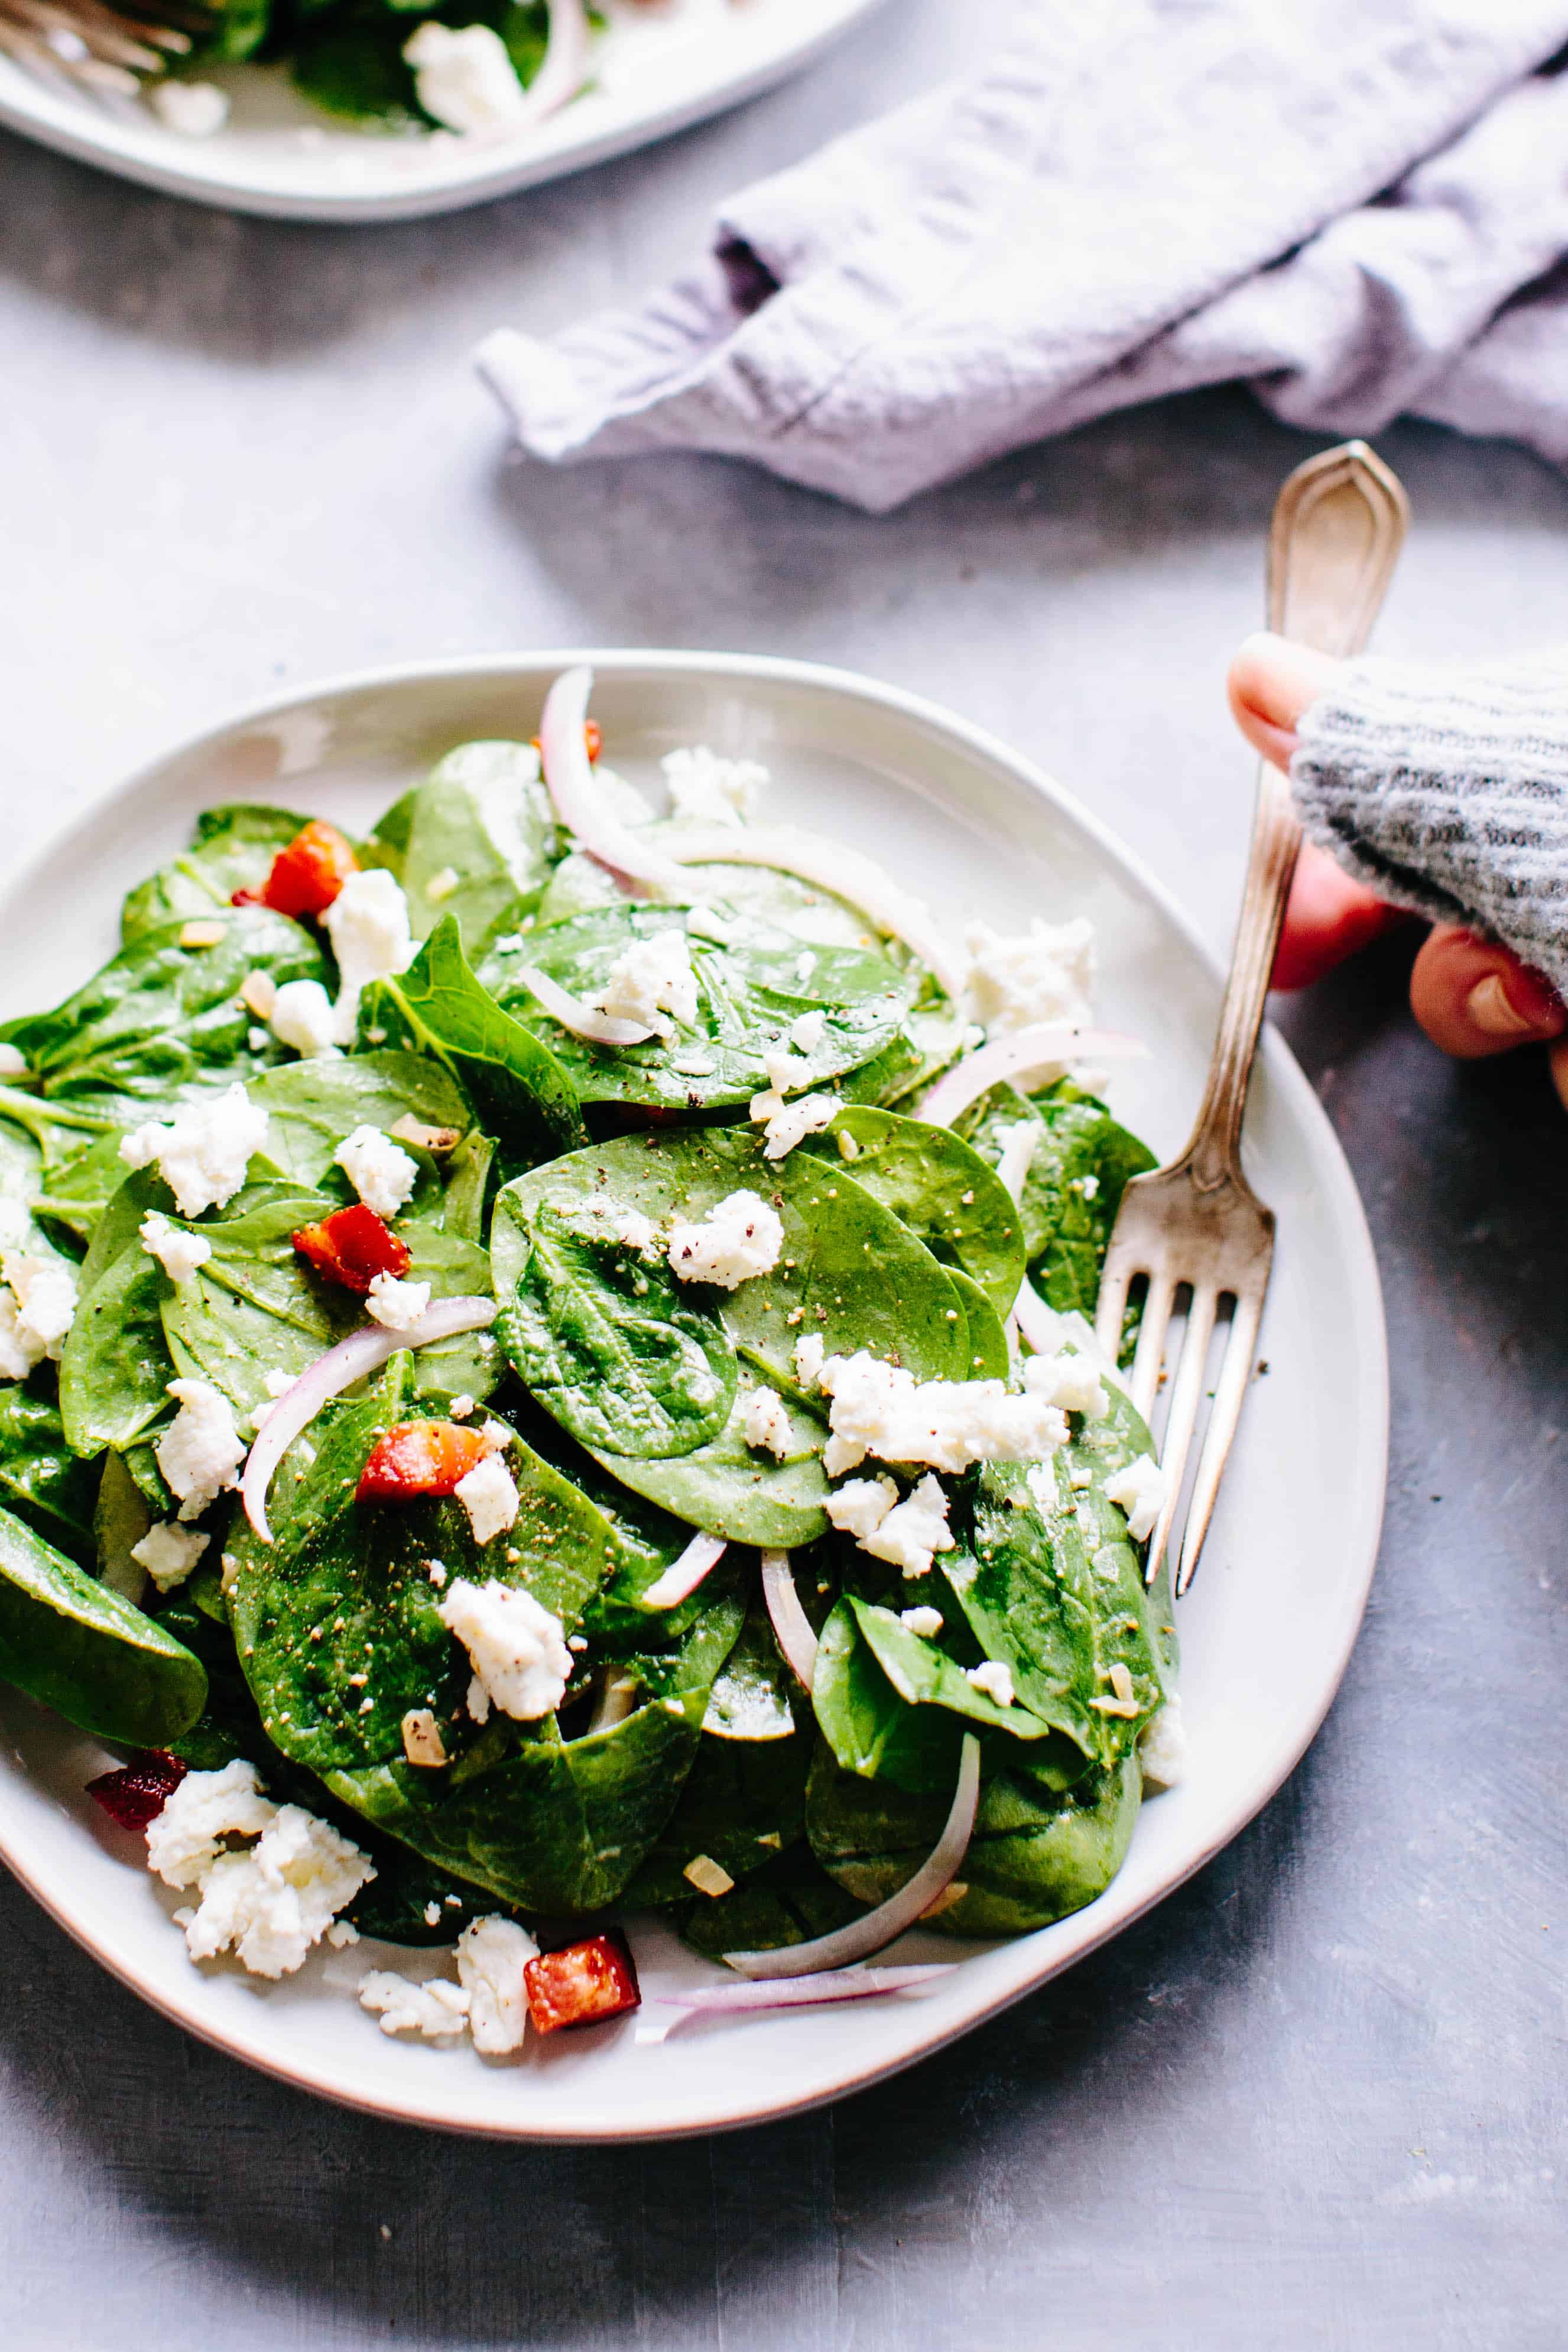 A plate of spinach salad with a fork